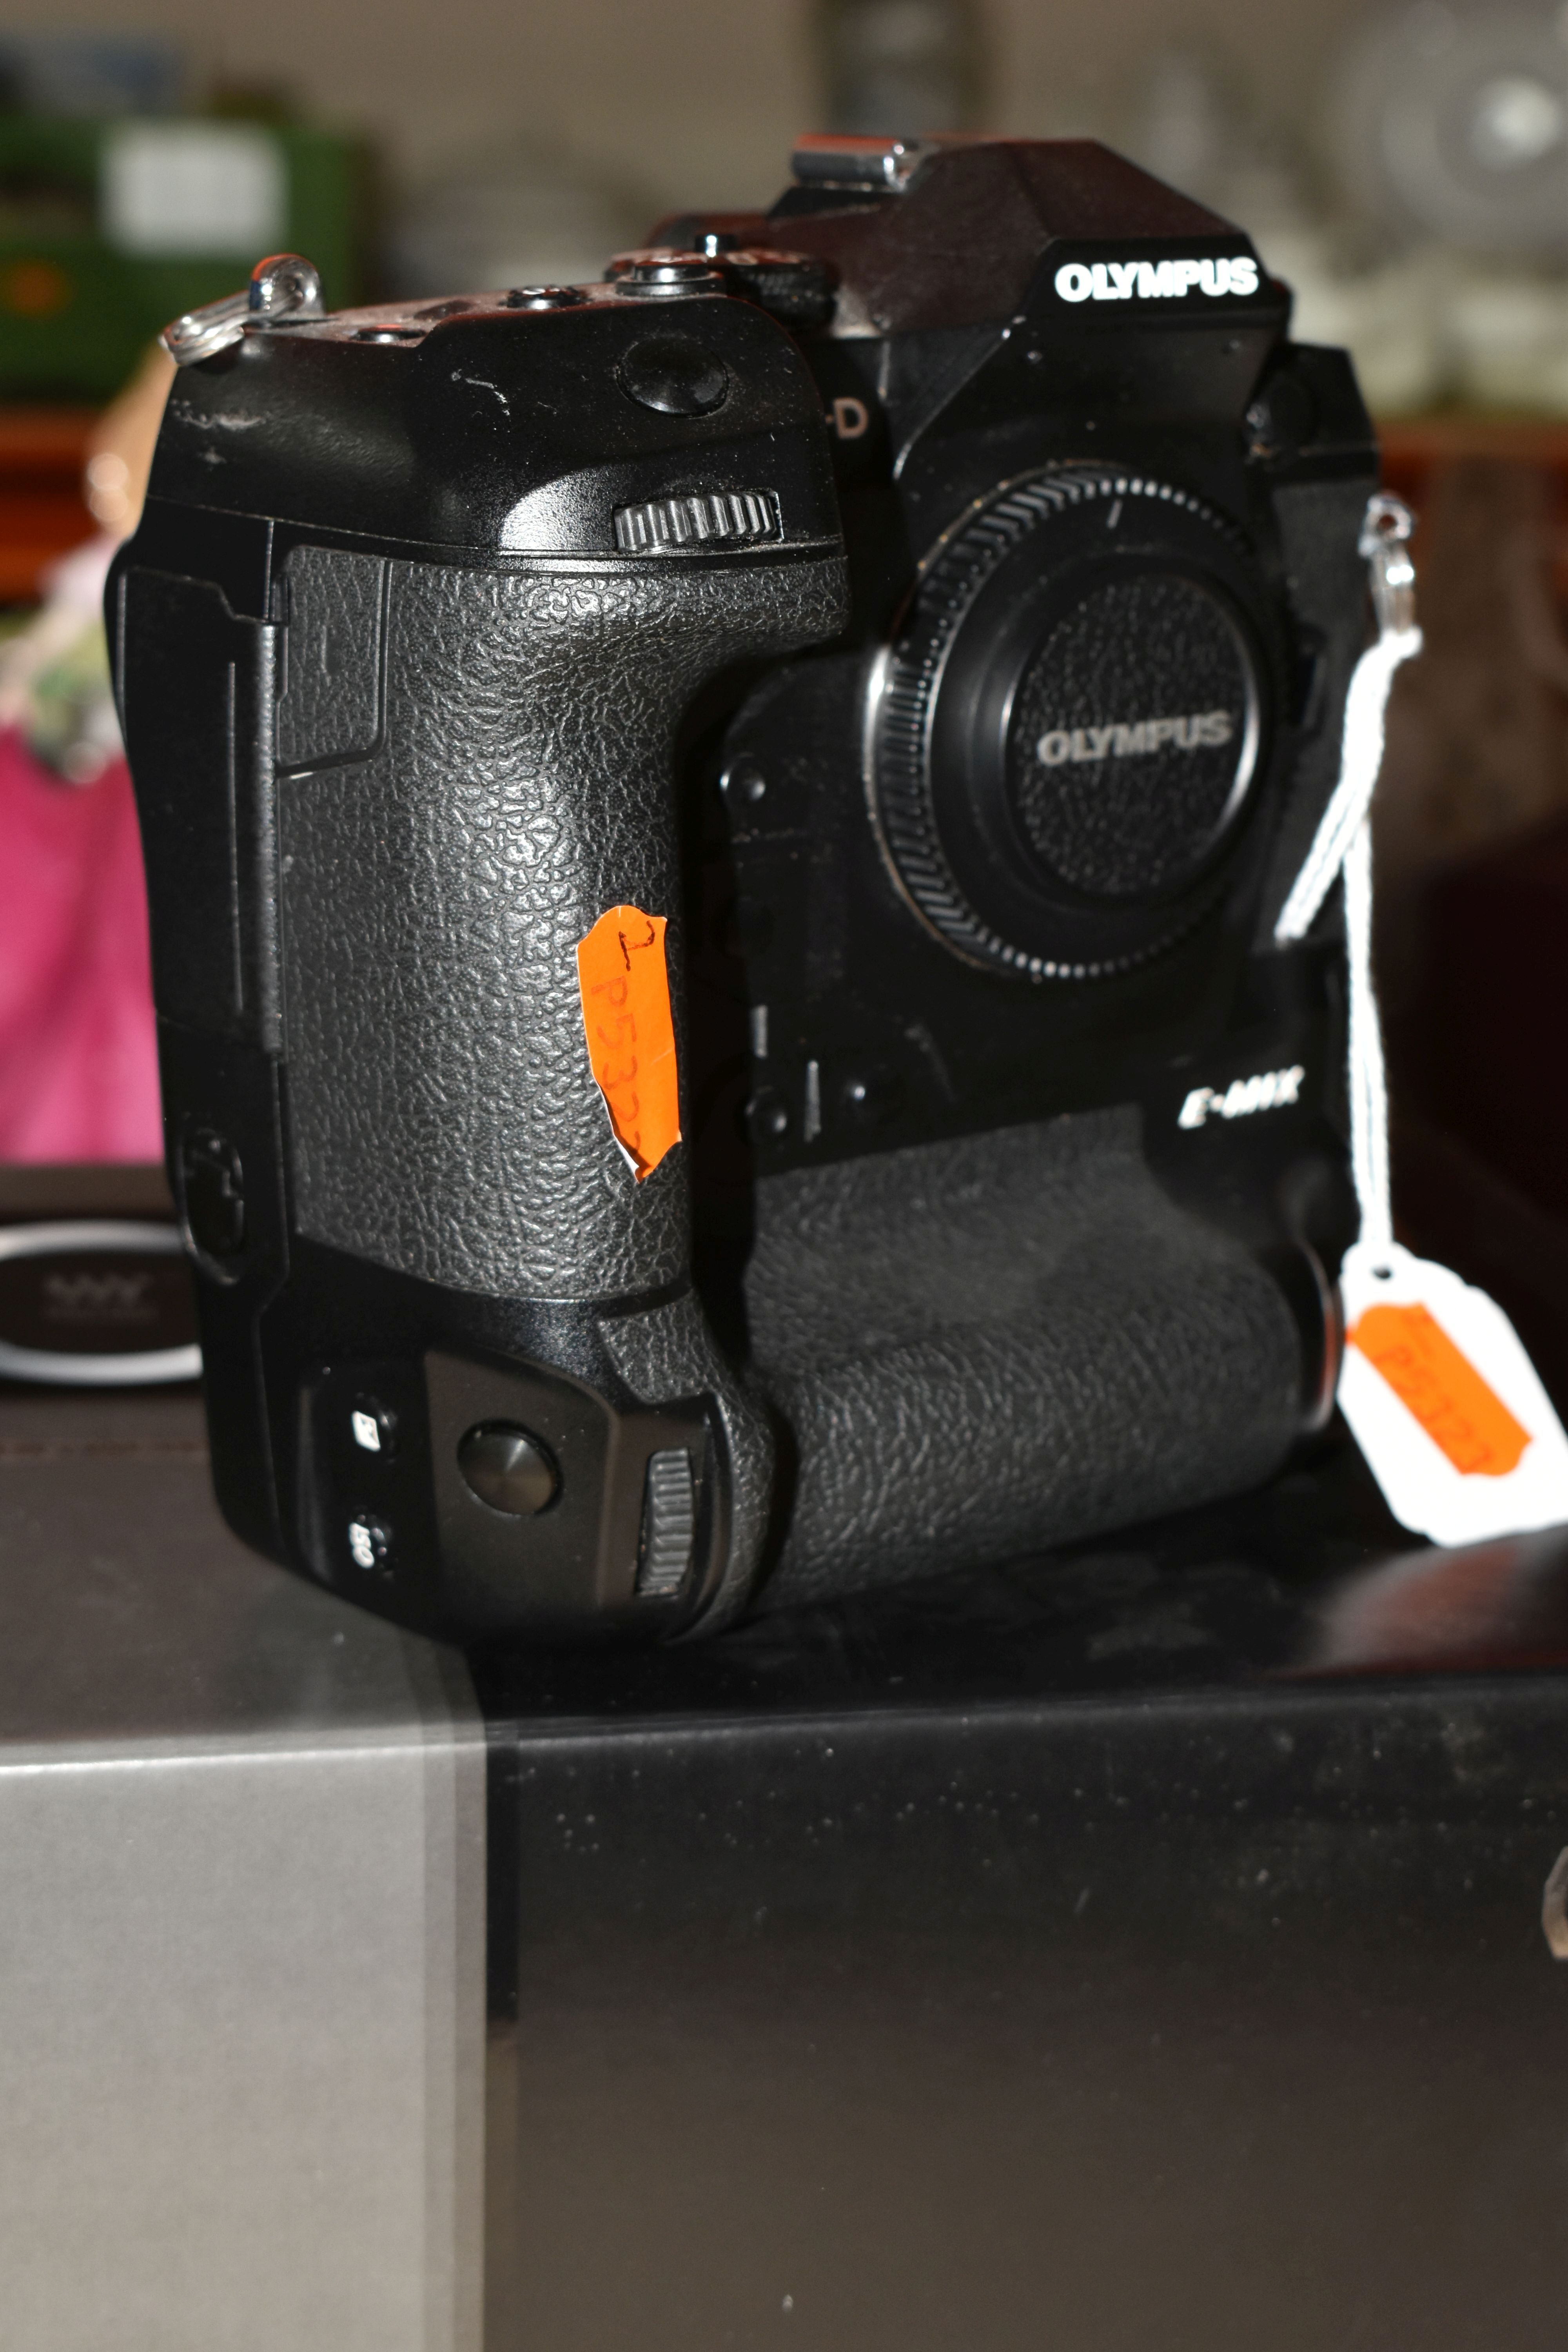 AN OLYMPUS OM-D E-M1X MIRRORLESS 4/3 CAMERA BODY, complete with battery charger (no UK power cable), - Image 4 of 4